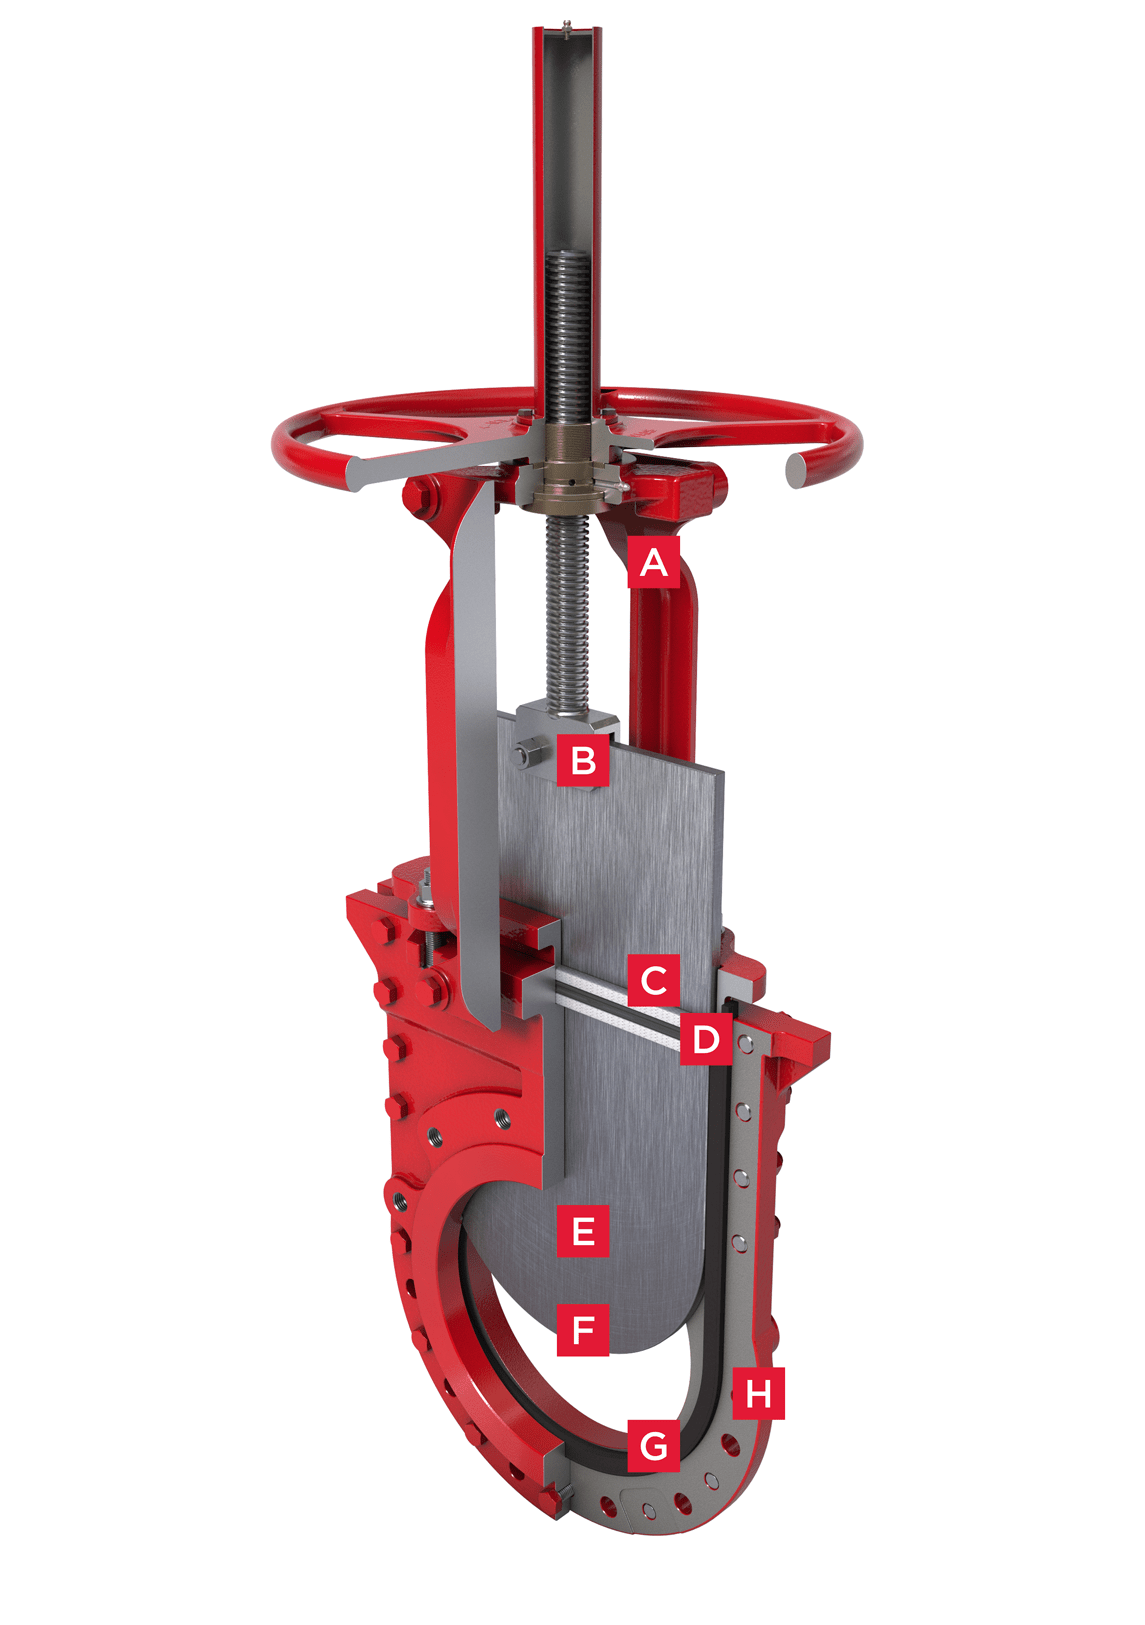 Bidirectional Knife Gate Valve Series 752 Features